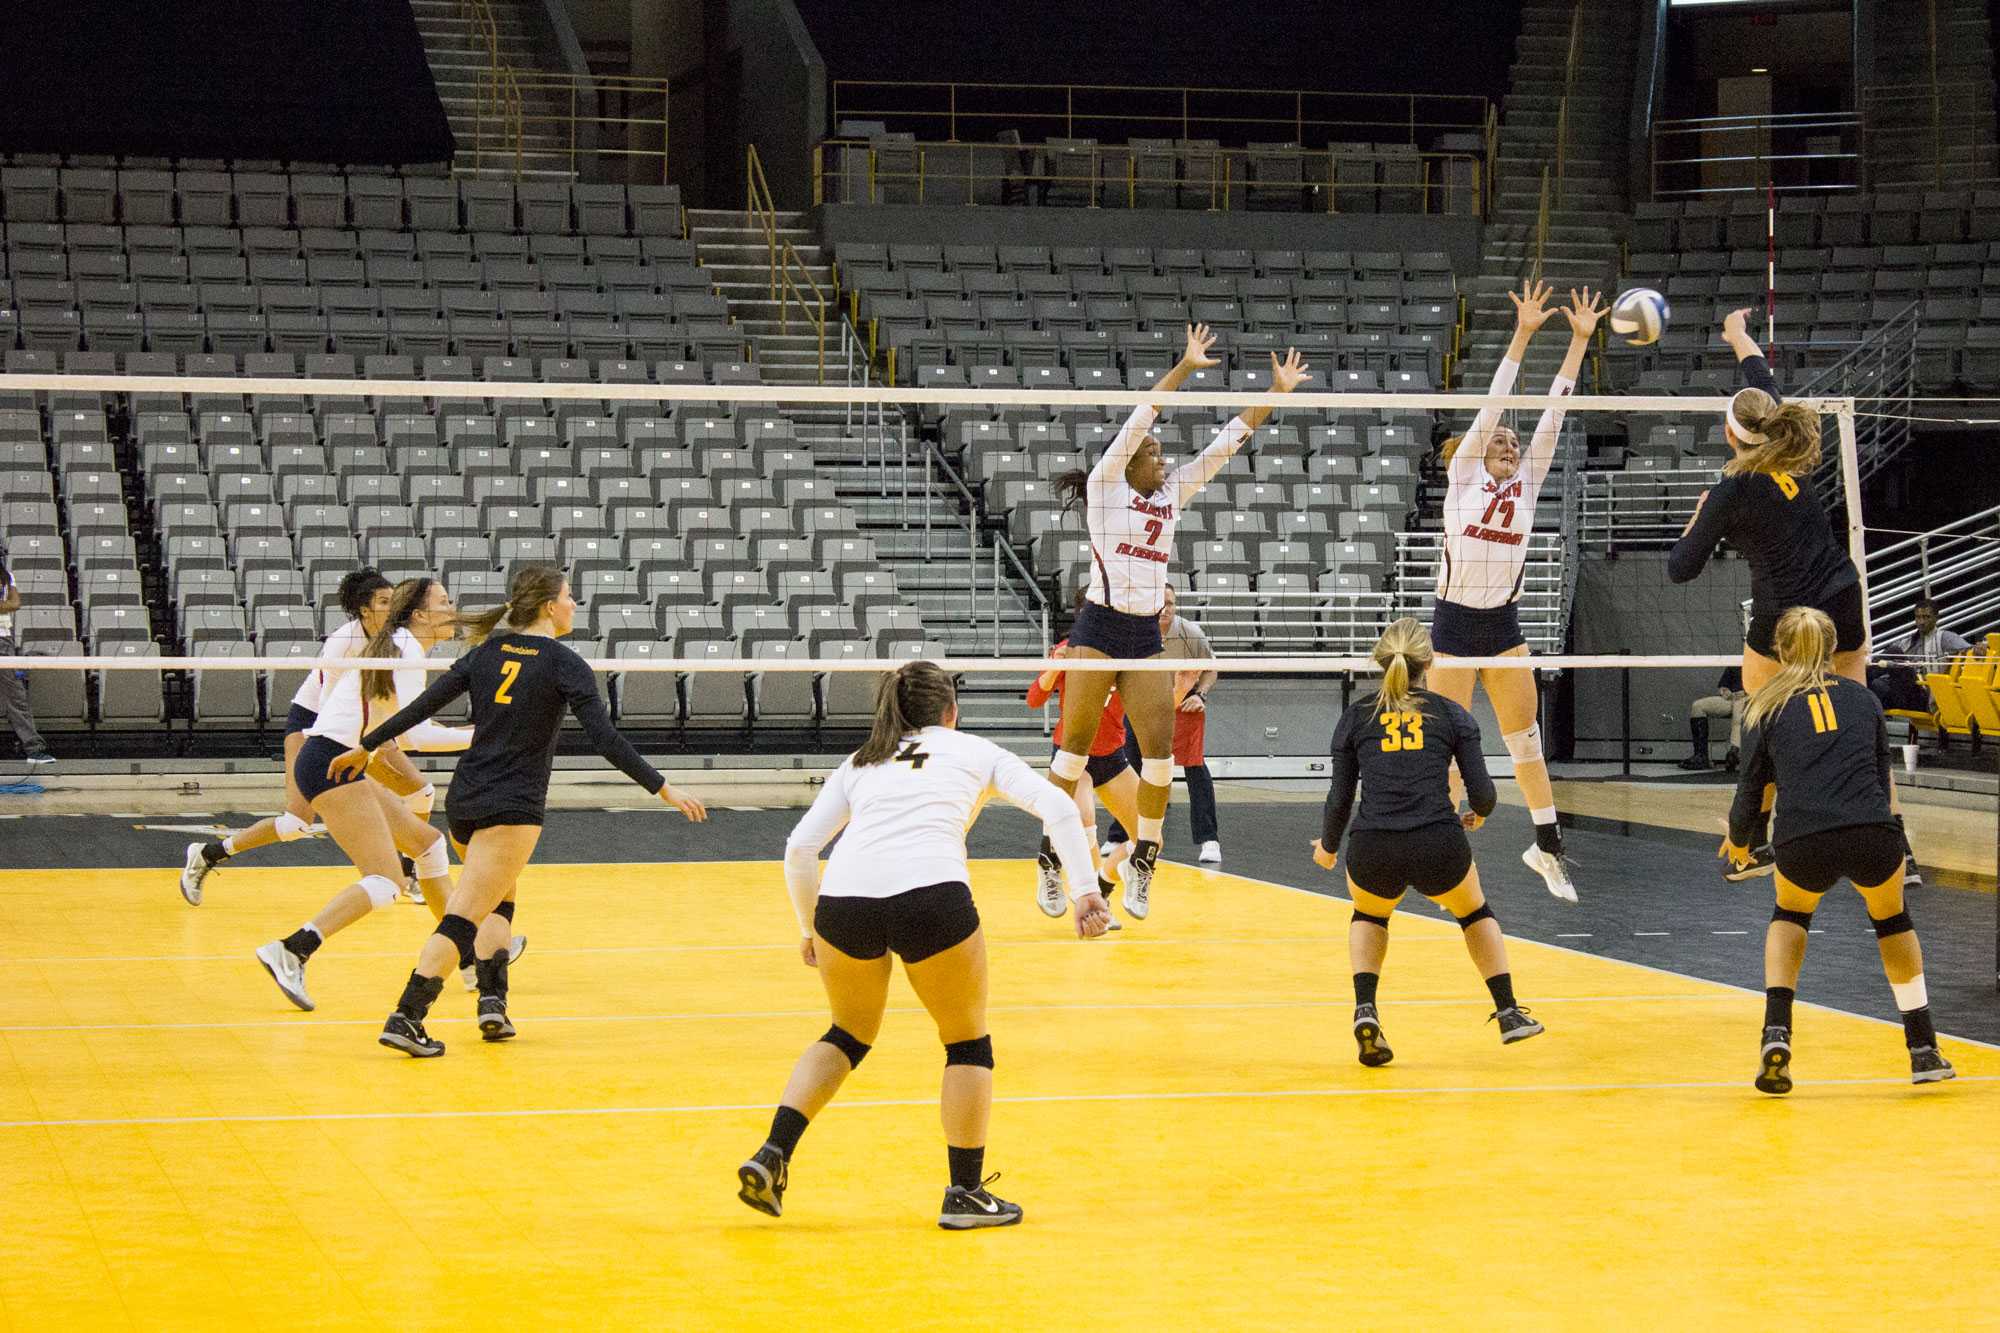 Appalachian State volleyball team spikes against Southern Alabama during a 2016 home game. Their first home game of this season is Friday, August 25th at 12pm.